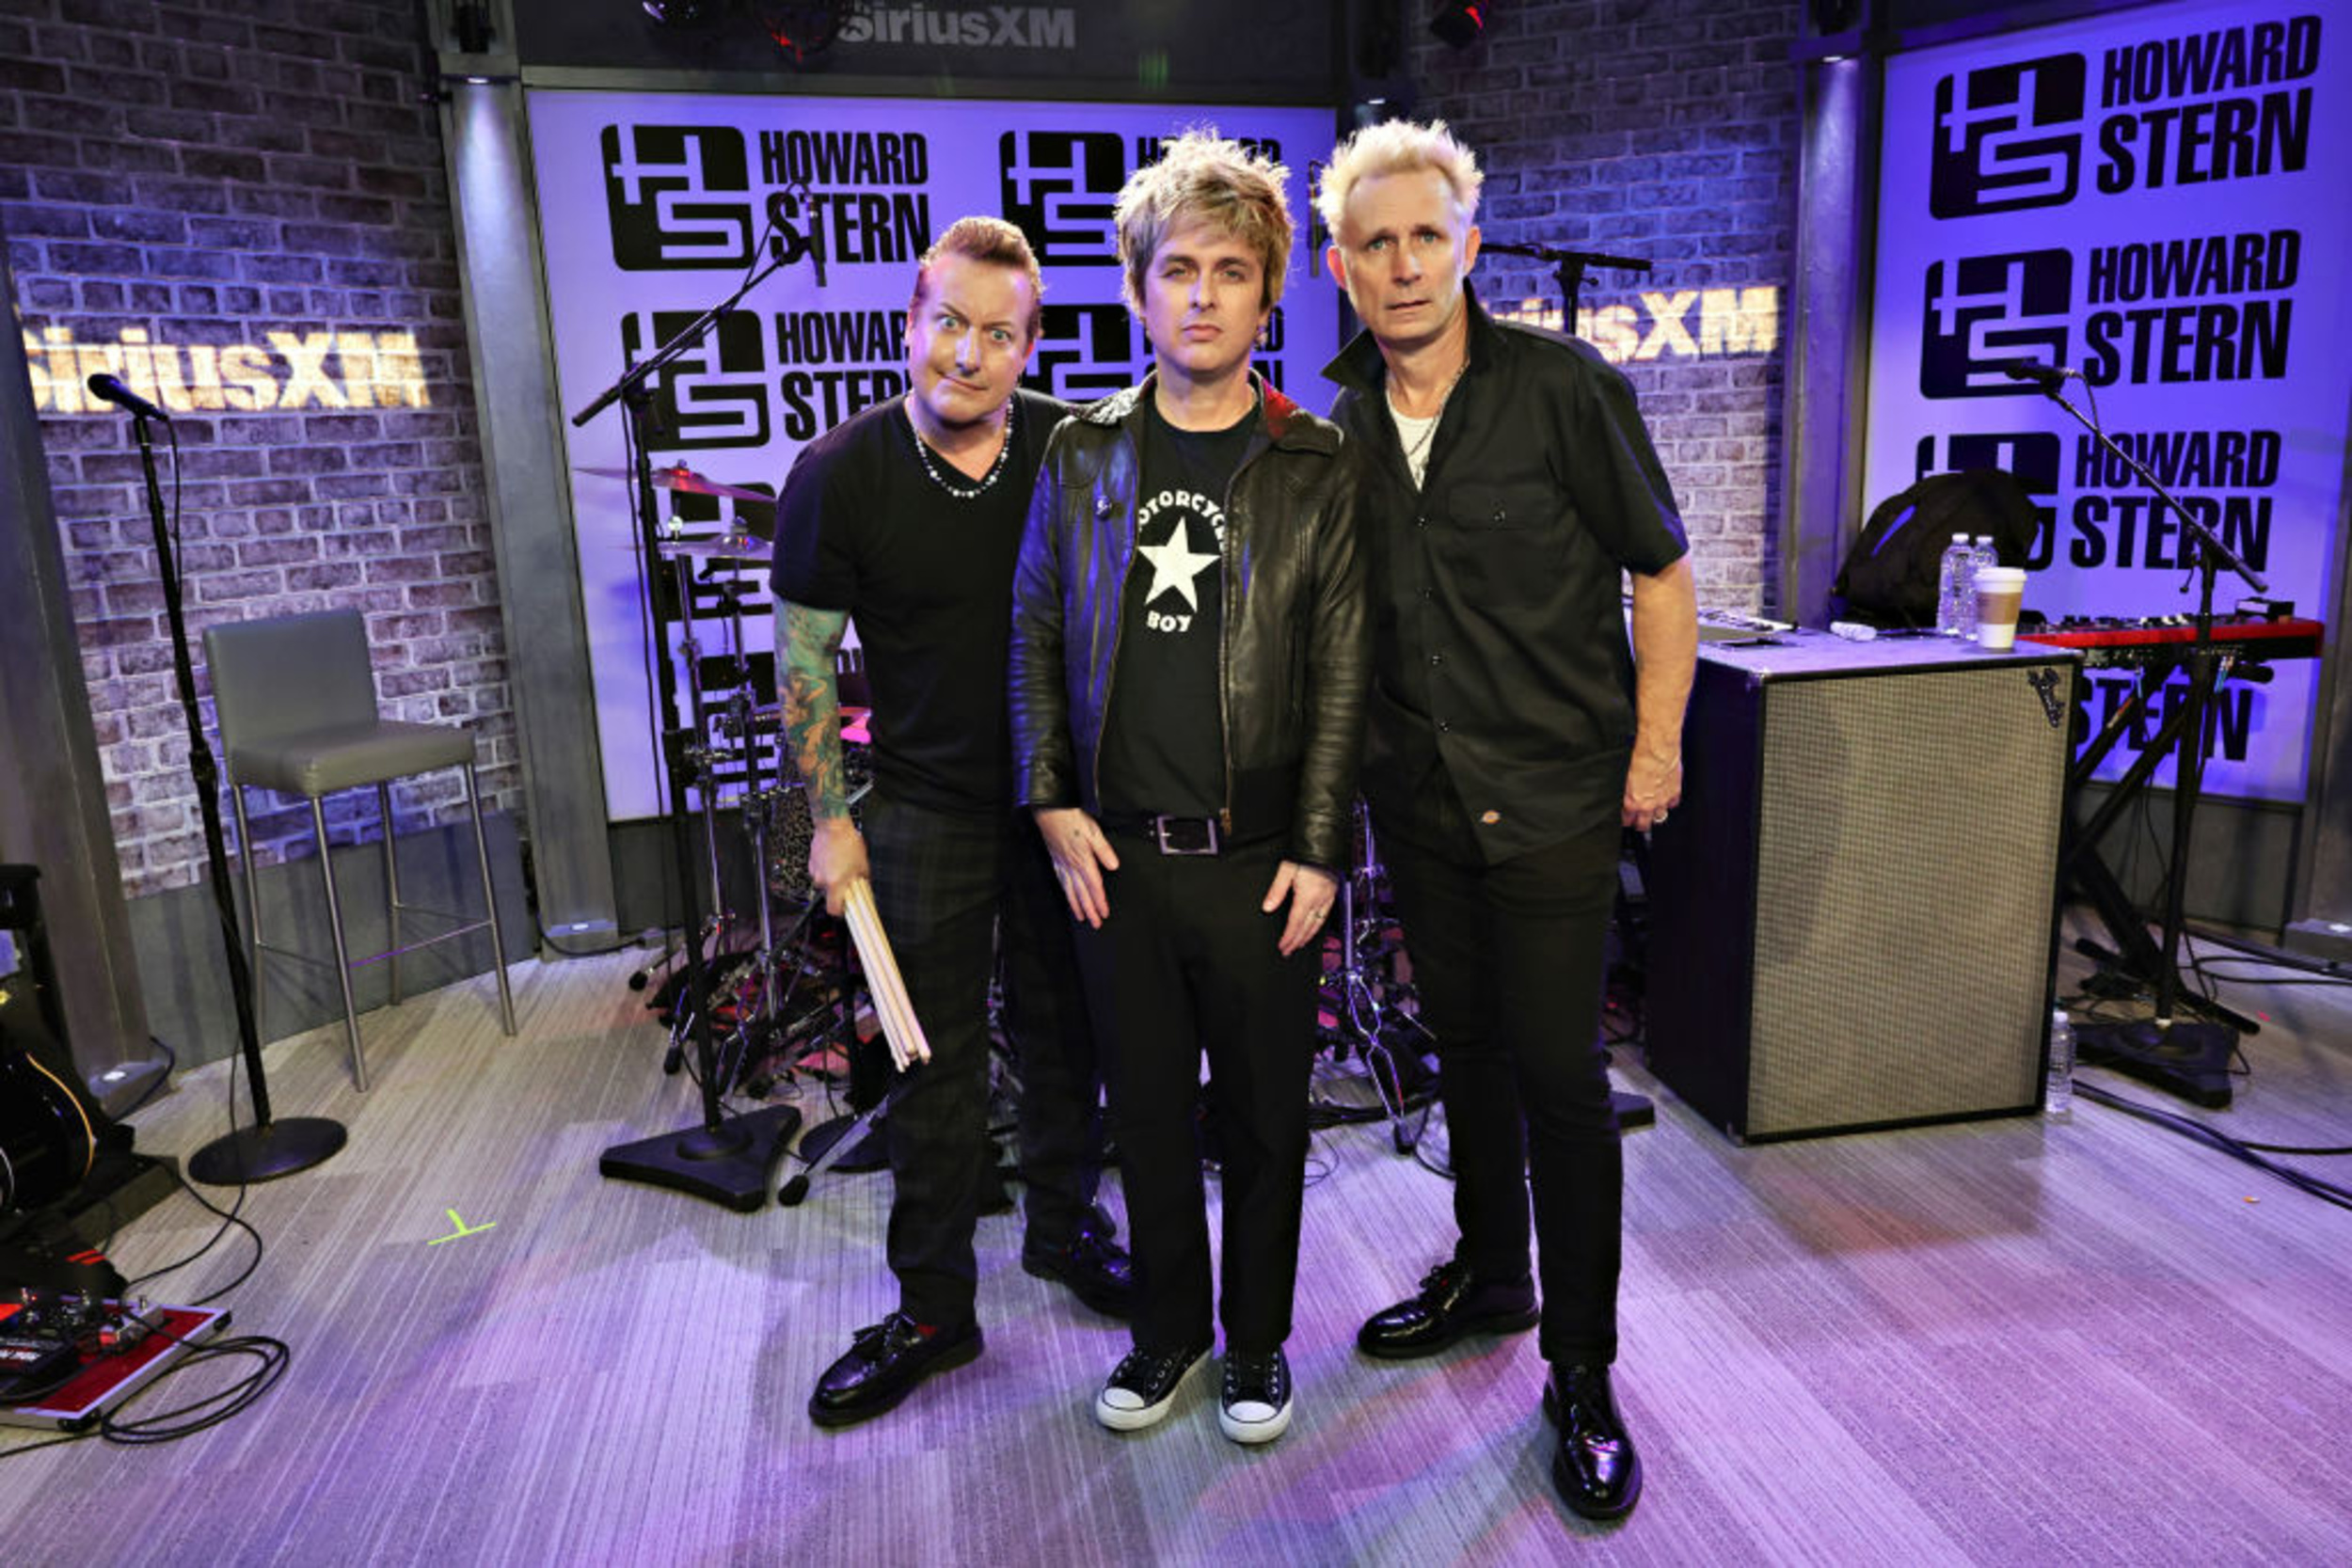 <p>Green Day is headed out for a stadium tour and they’re bringing a few friends with them. The pop-punk trio will embark on the "Saviors Tour" that will include acts Rancid and The Linda Lindas, as well as The Smashing Pumpkins. In support of the band’s newest album <em>Saviors,</em> the North American leg of the tour will kick off on July 29th in Washington, D.C. </p><p>You may also like: <a href='https://www.yardbarker.com/entertainment/articles/the_best_karaoke_songs_from_the_2020s_030324/s1__39920474'>The best karaoke songs from the 2020s</a></p>